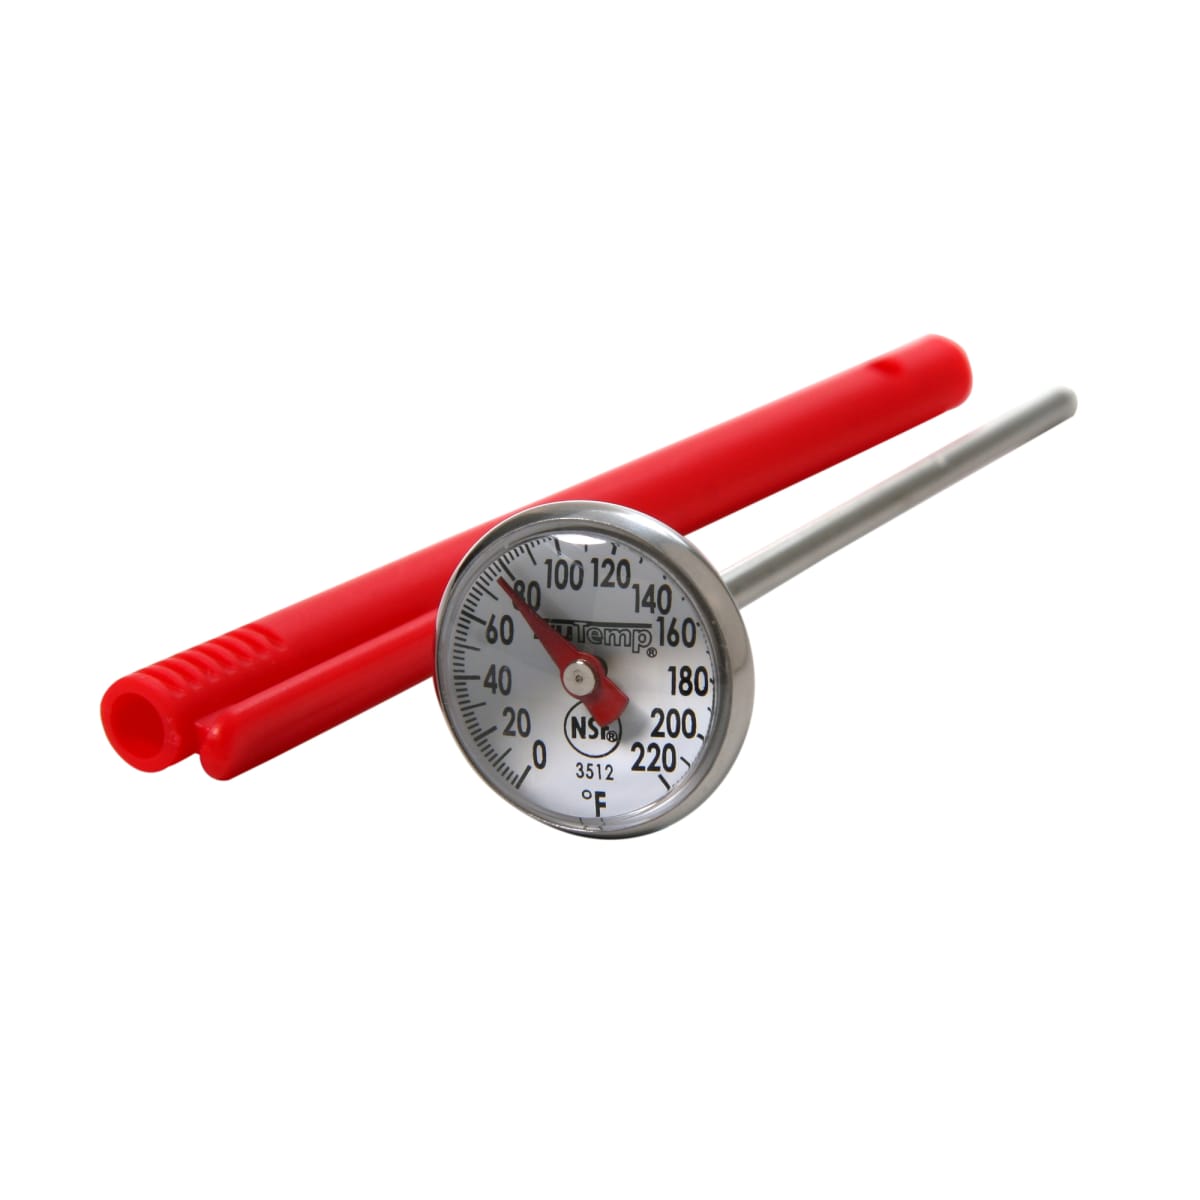 Taylor 1 Dial Stainless Pocket Thermometers - Bunzl Processor Division